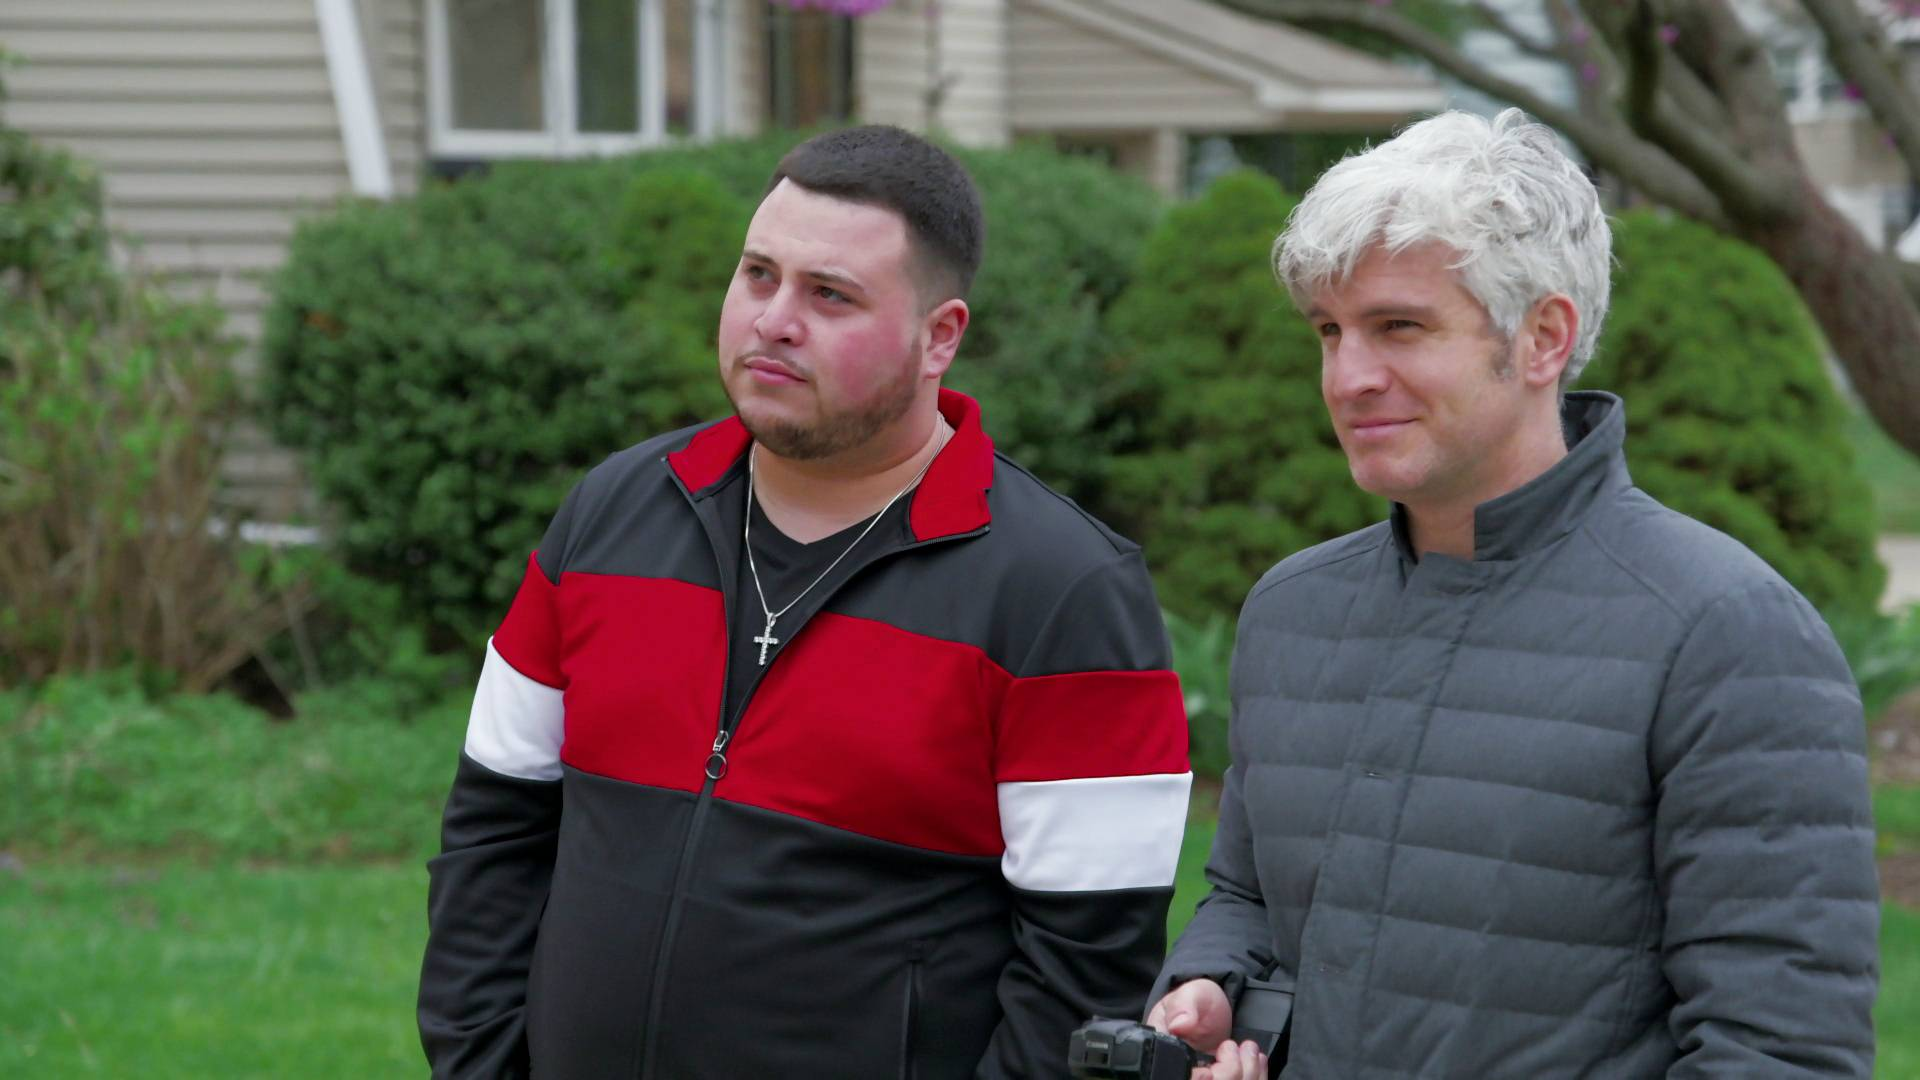 Max is holding a camera and standing next to a man on Catfish.